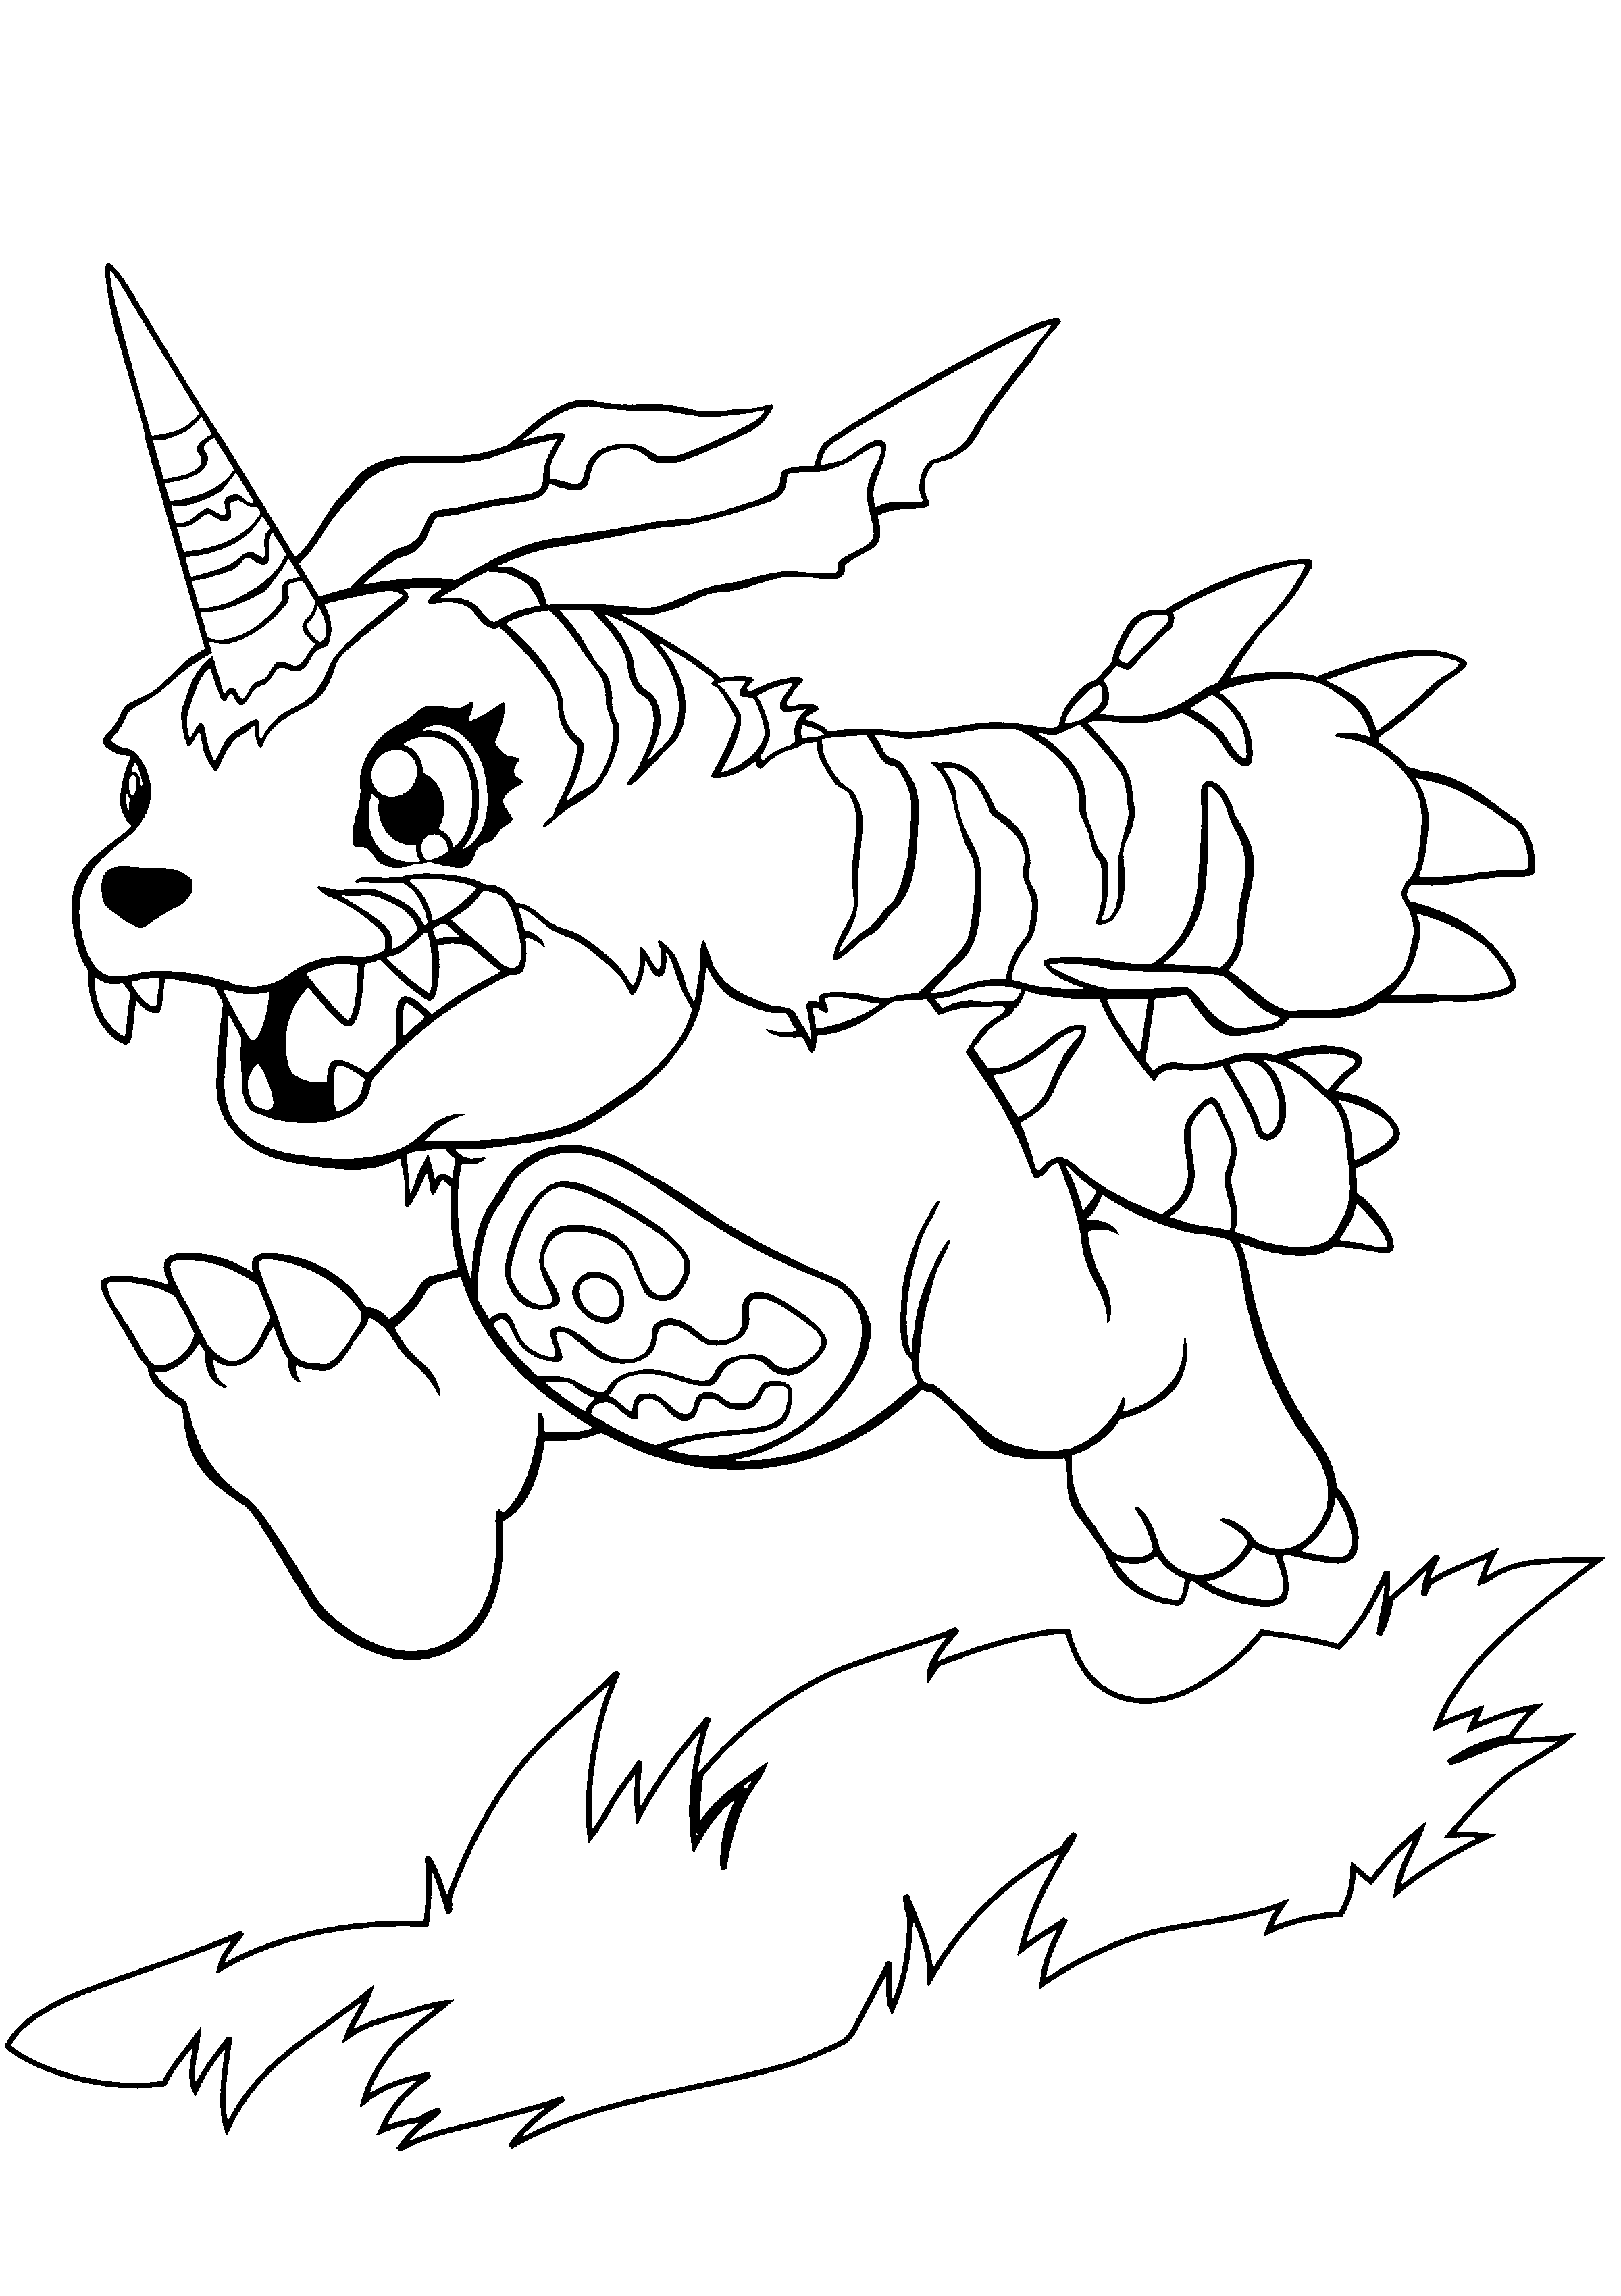 Coloring pages printable - northernmilo